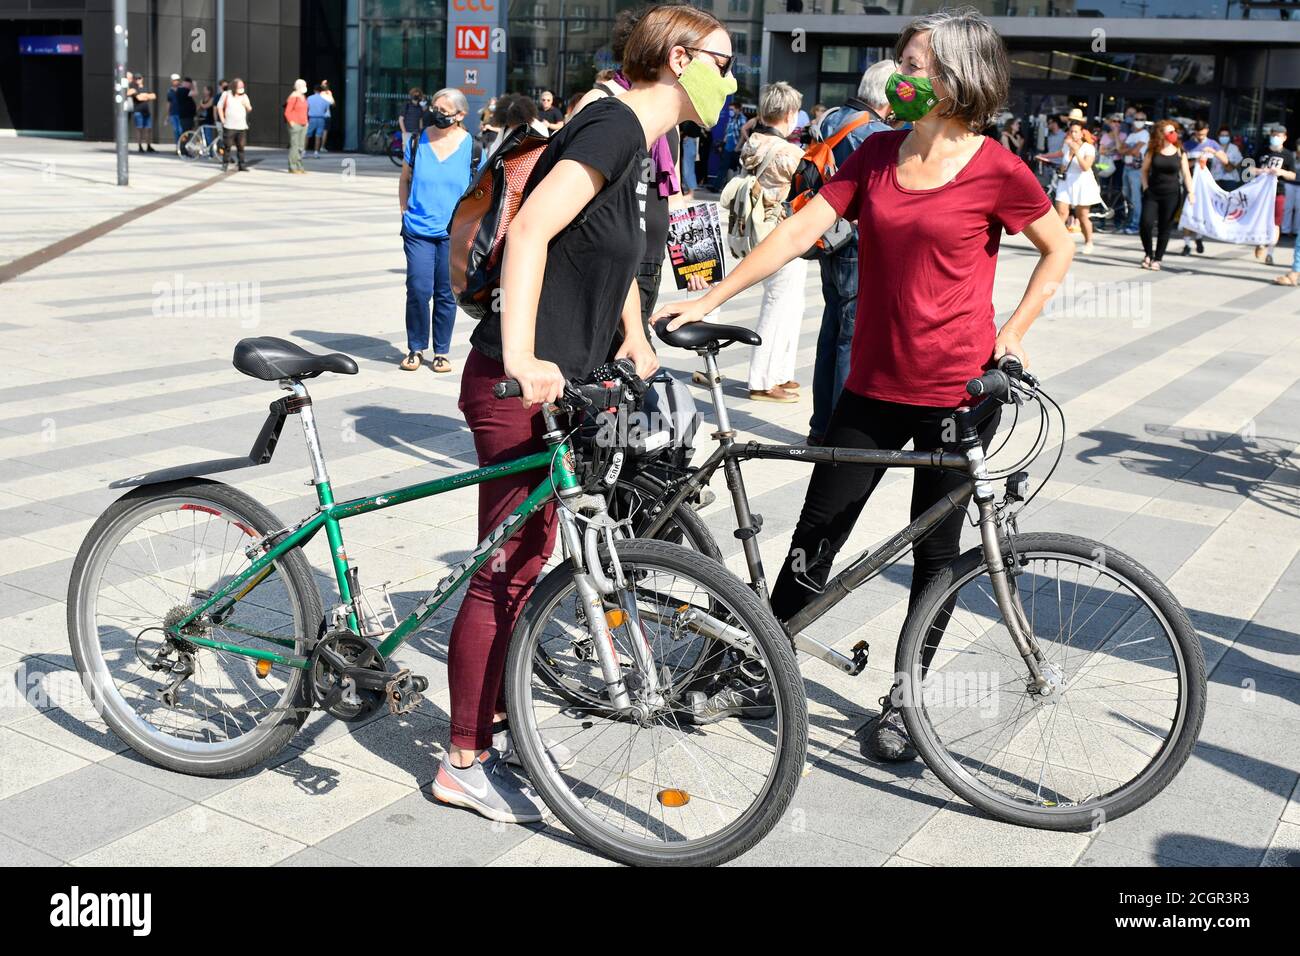 Vienna, Austria. 12th Sep, 2020. Demonstration for a human asylum policy. Moria is in ashes - evacuate the camp now!  Image shows (R) Birgit Hebein, Vice Mayor of Vienna. Credit: Franz Perc / Alamy Live News Stock Photo